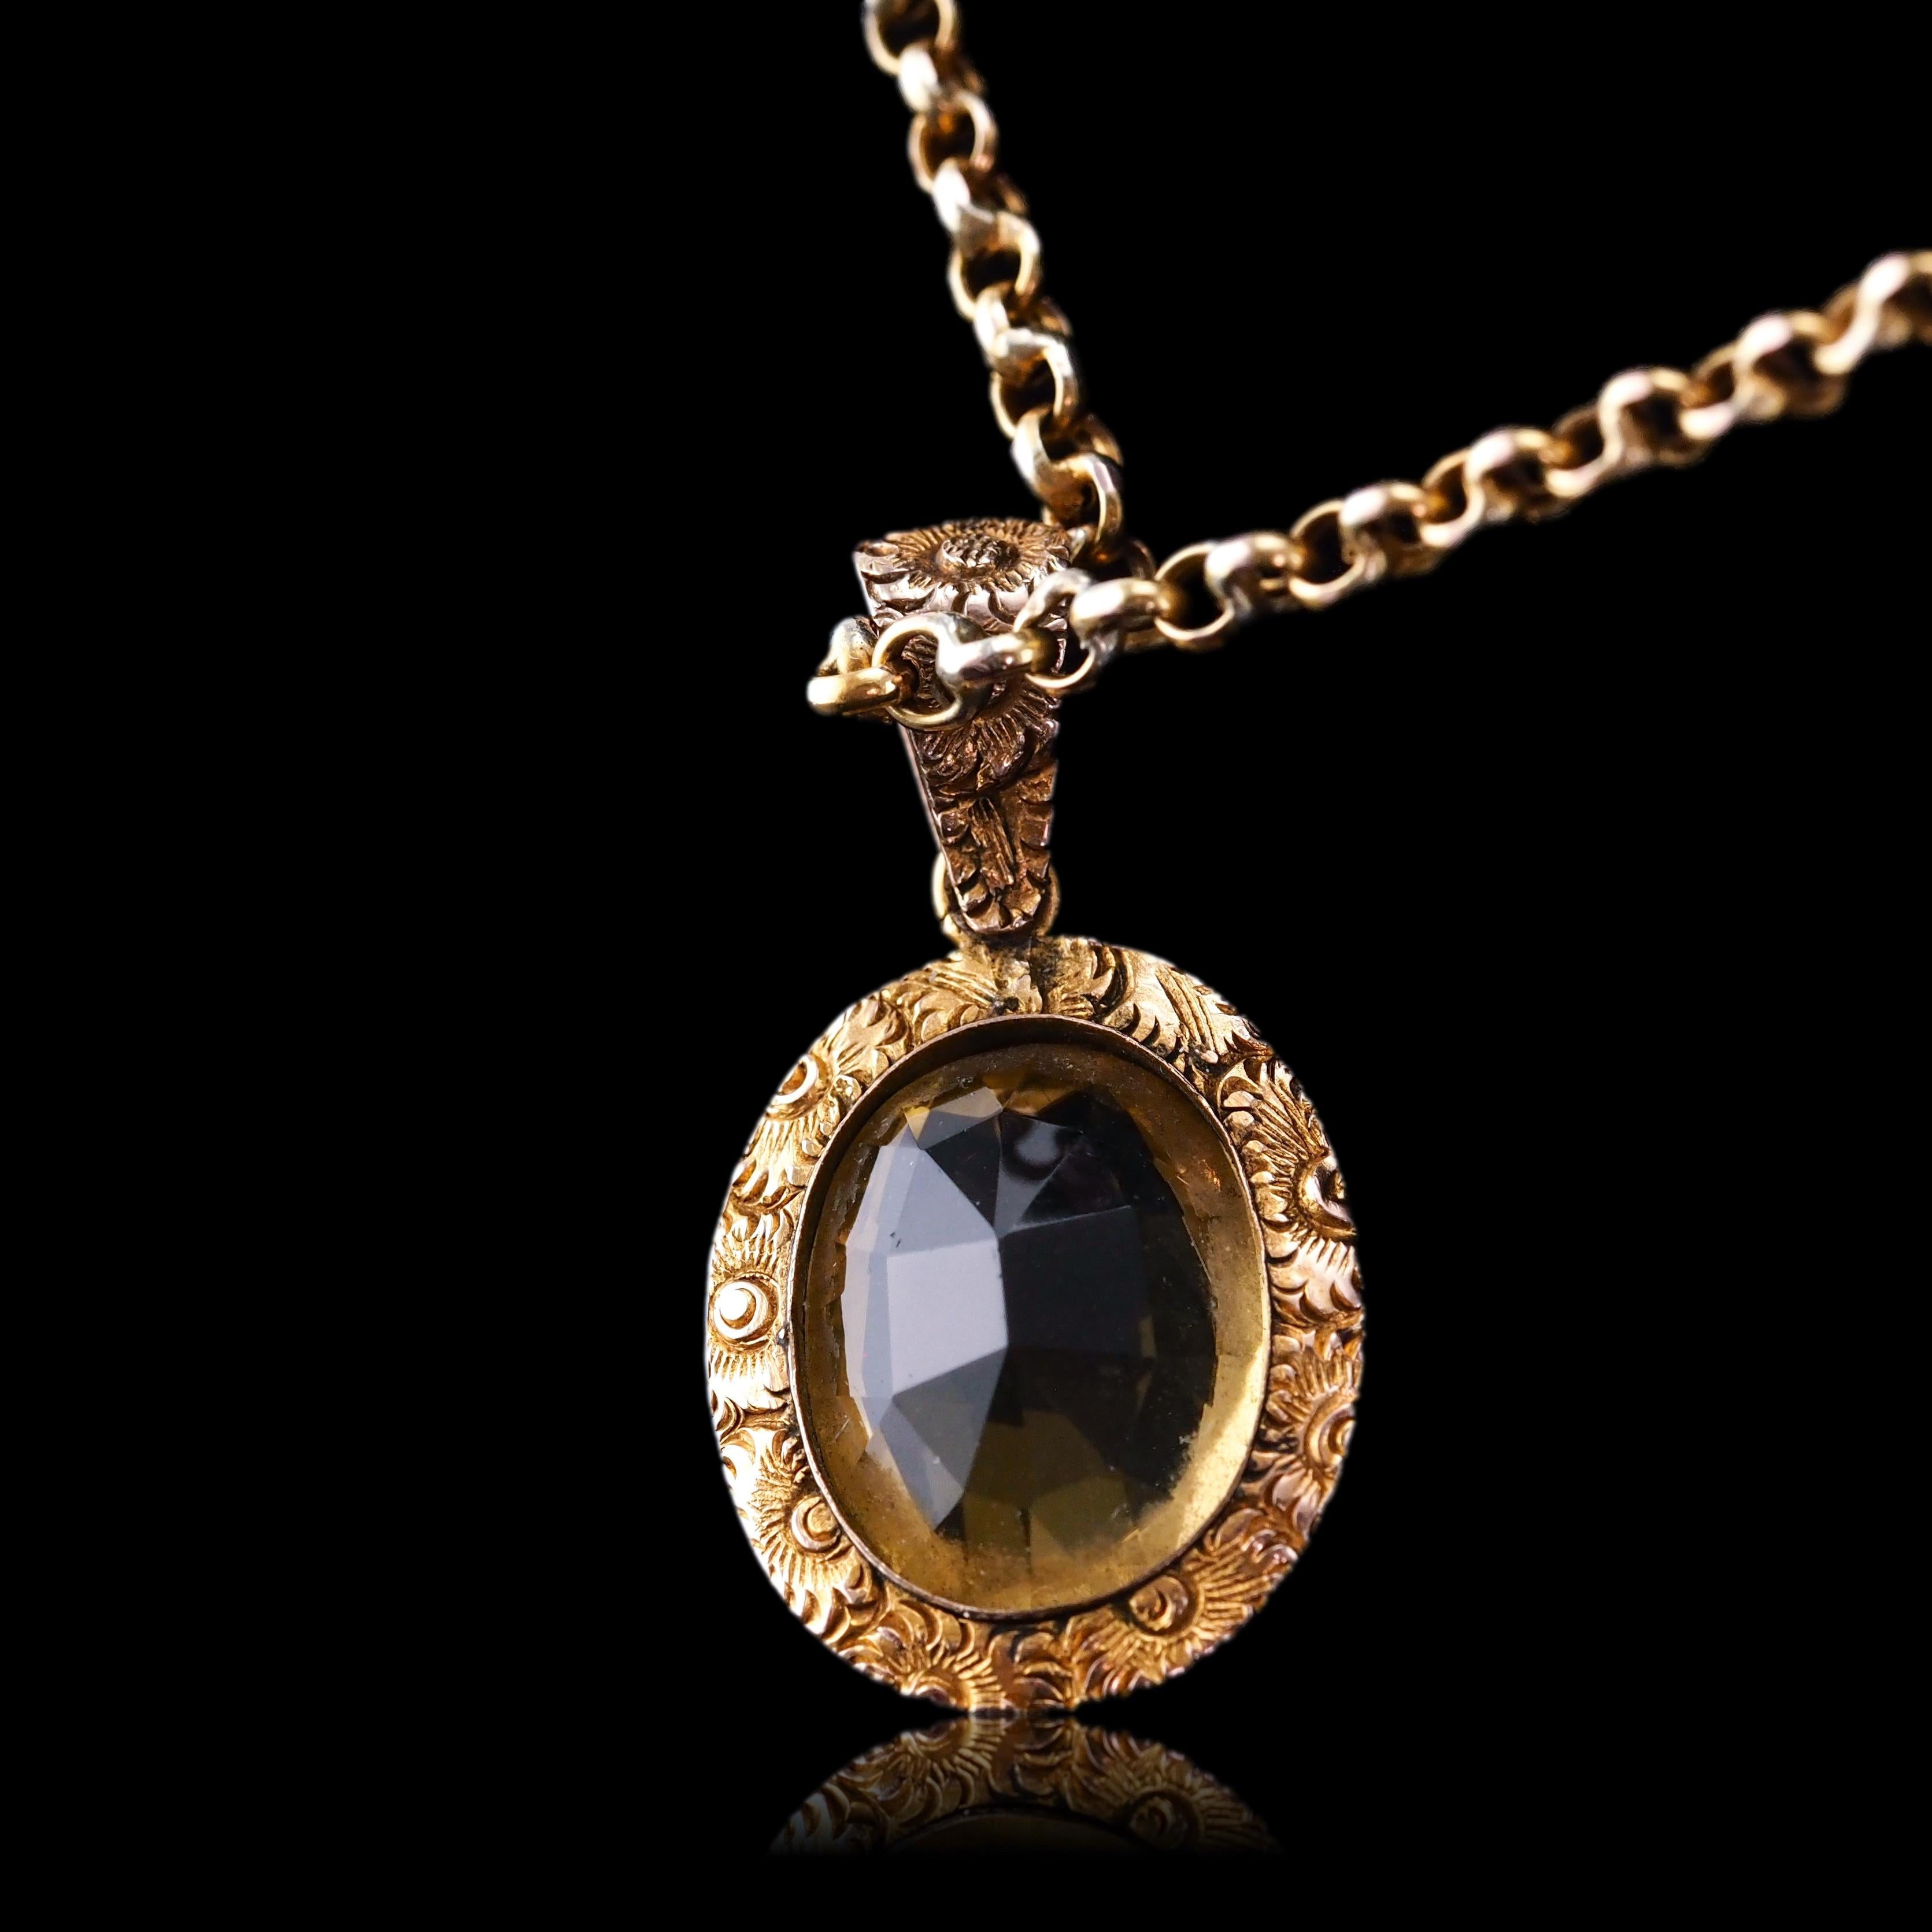 Antique Victorian Citrine Necklace with Chased Floral Pendant 9K Gold c.1850 6